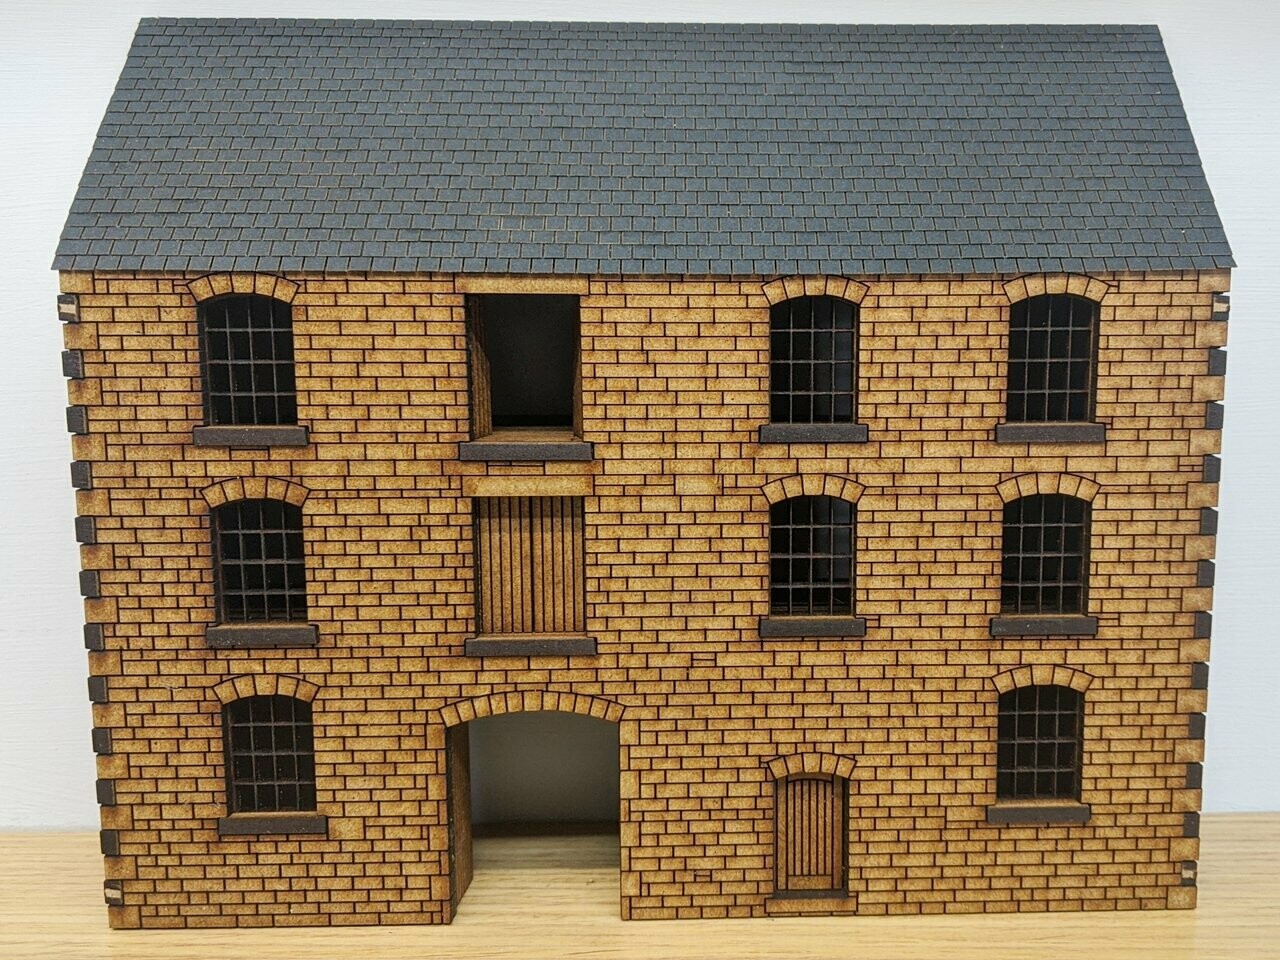 Small Low Relief Stone Mill/Warehouse